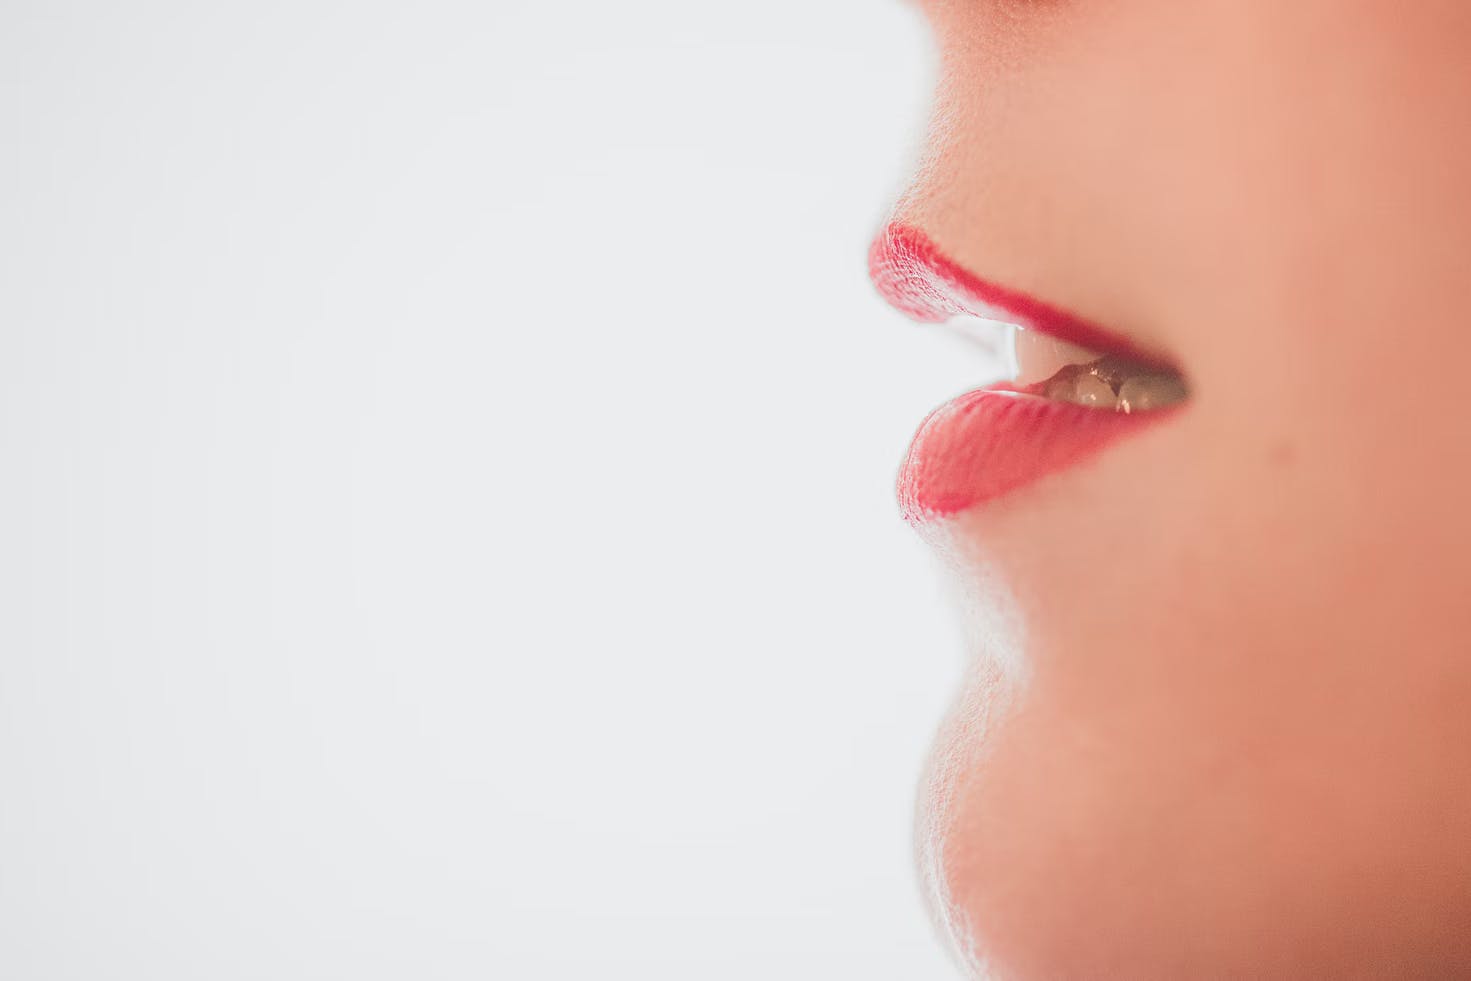 Chapped lips a sign of dehydration